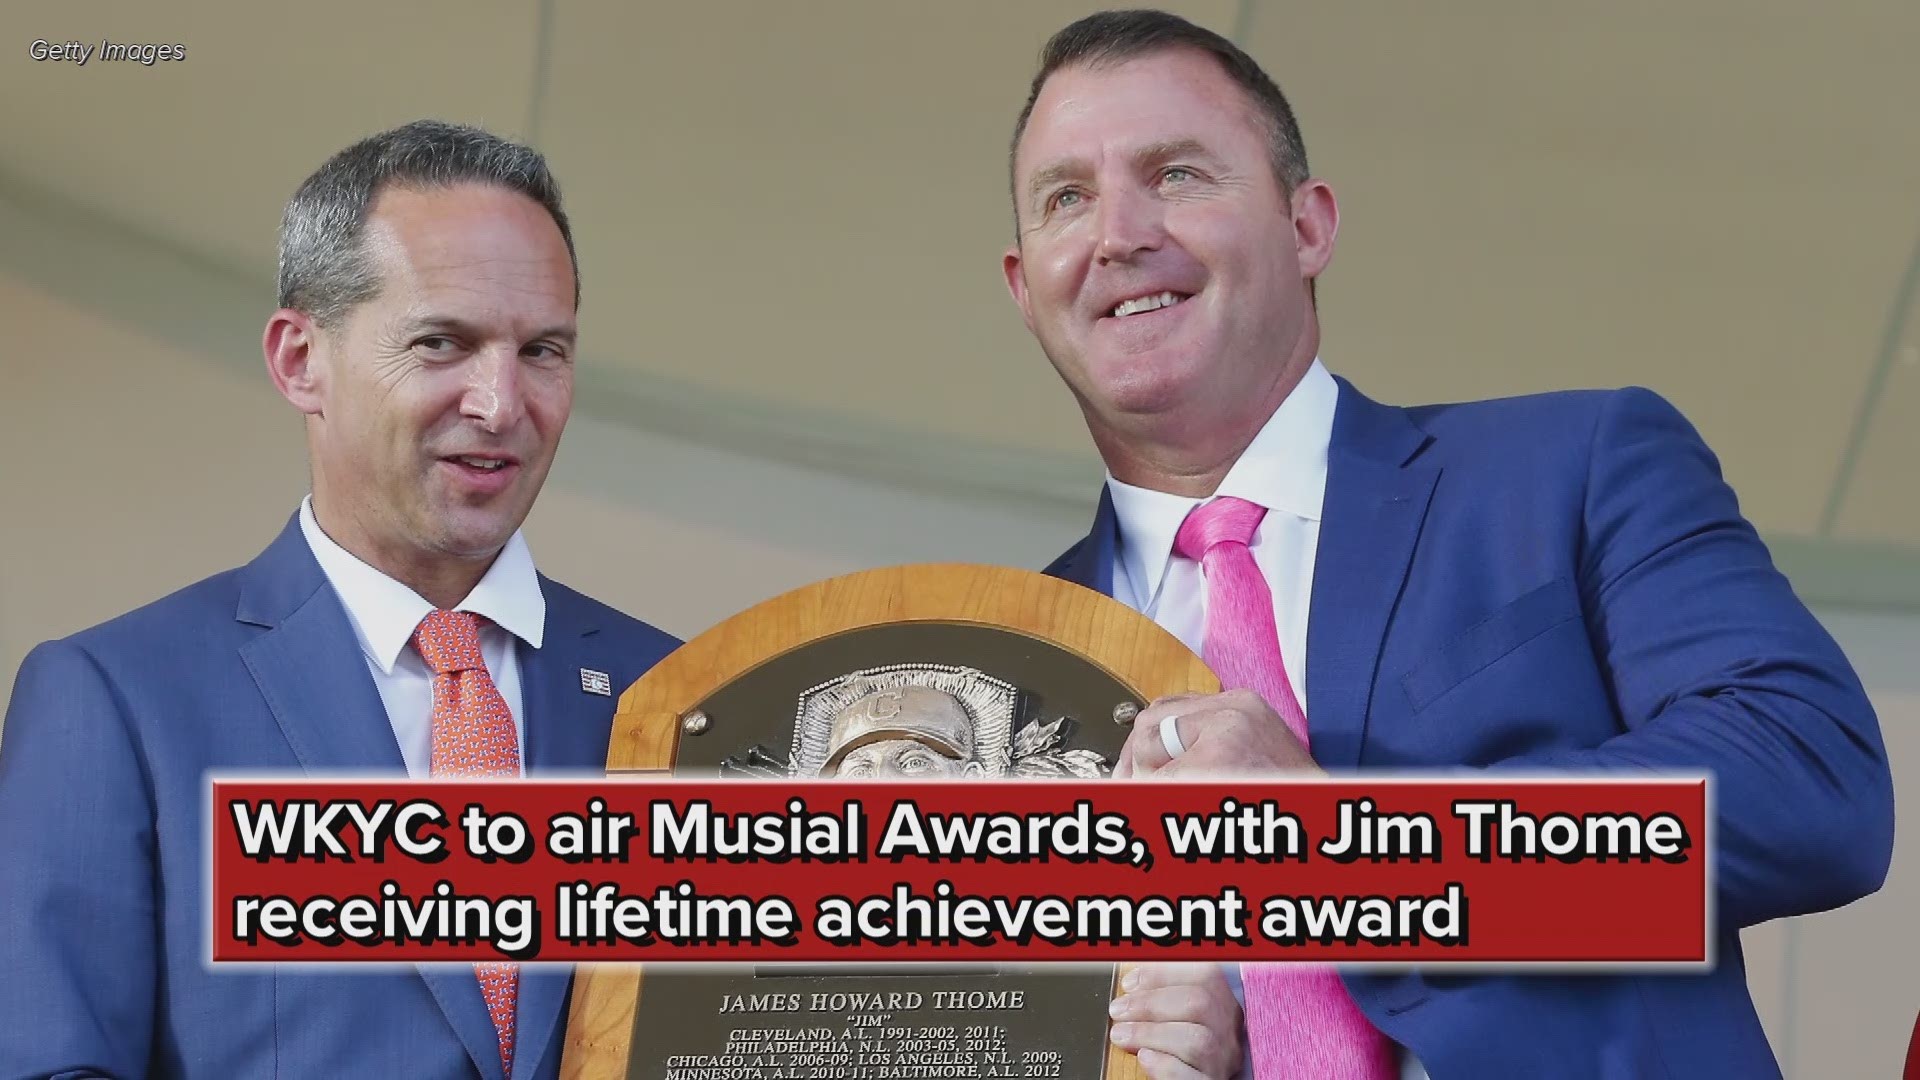 Viewers will be able to watch Thome's latest honor on Saturday, Dec. 15 at 8 p.m.